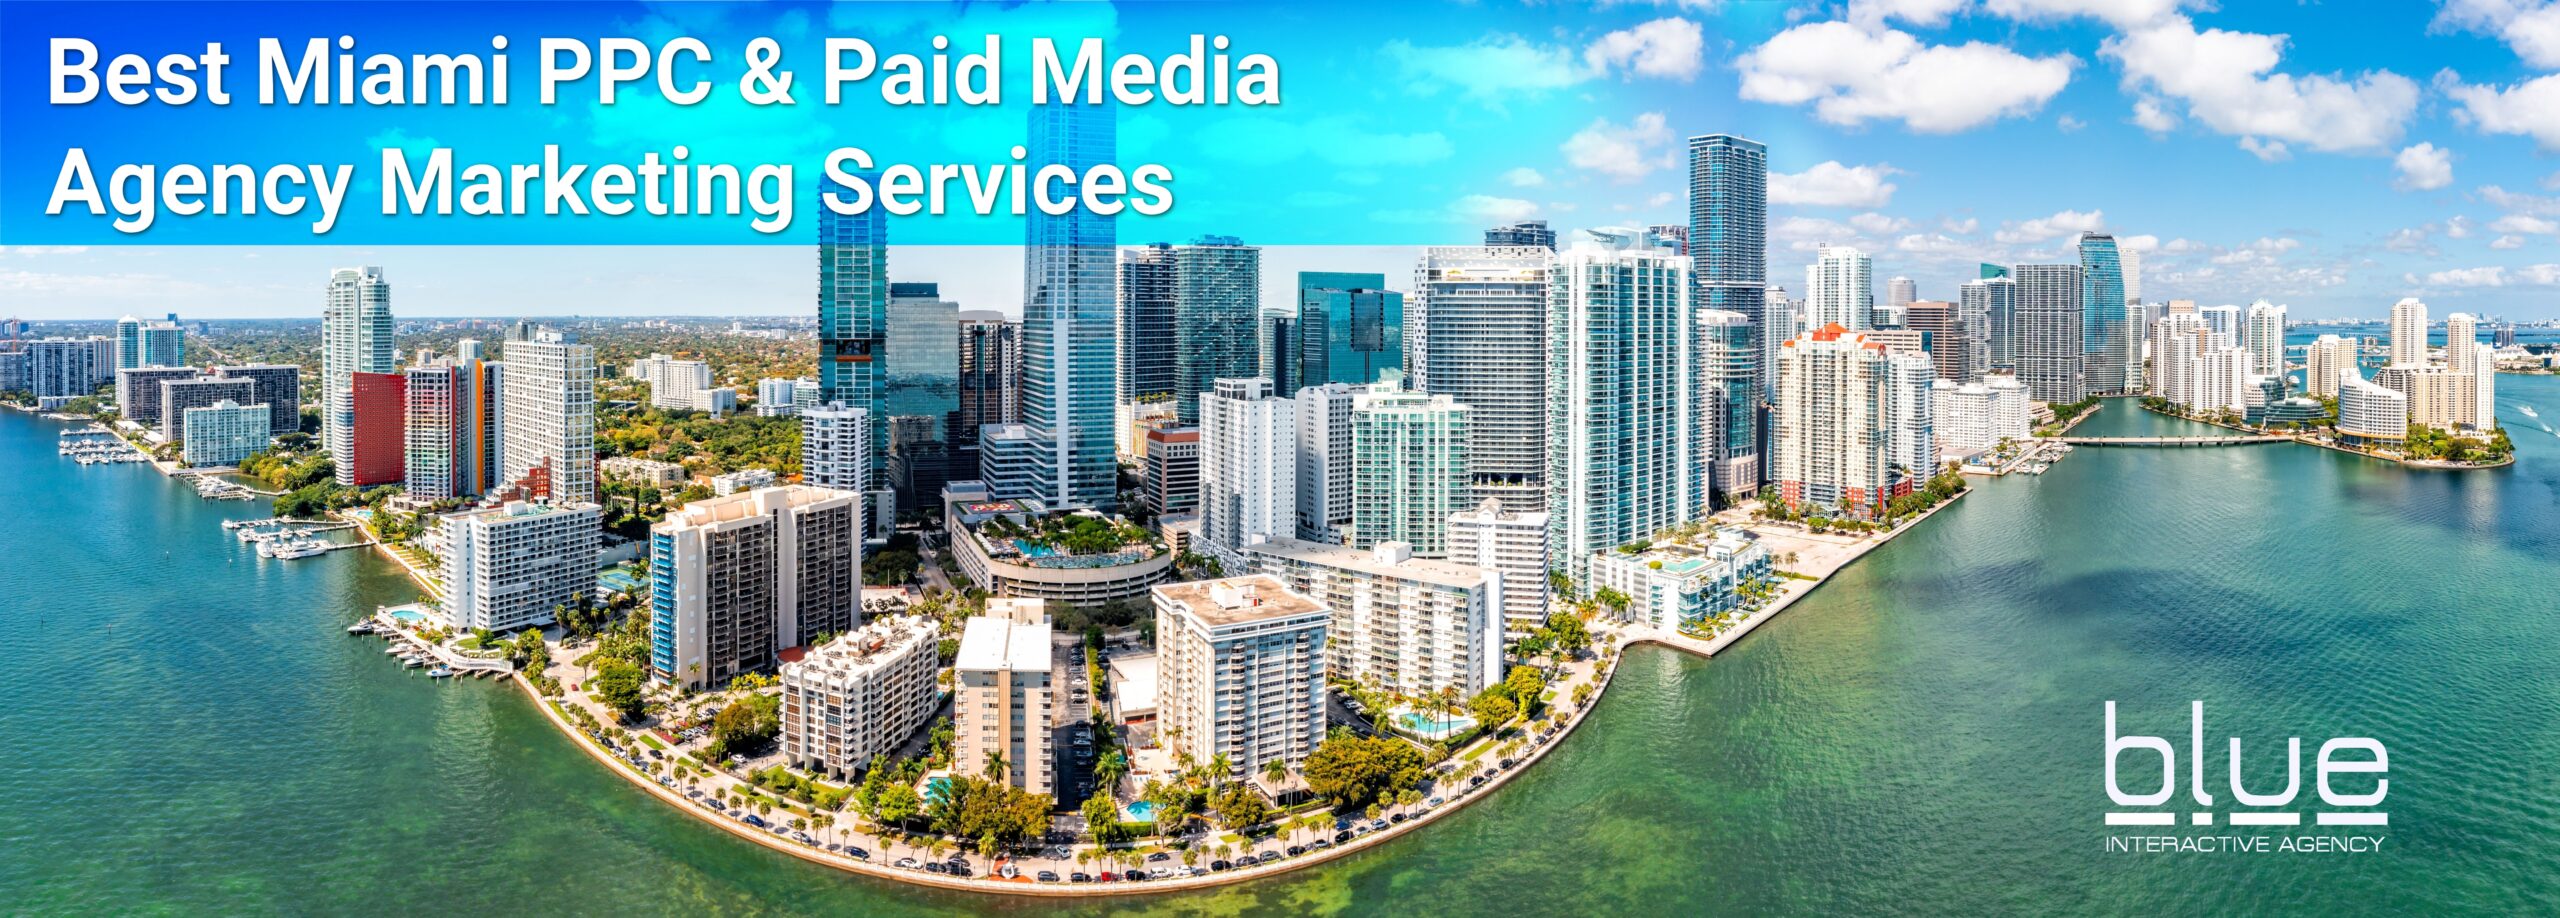 Best Miami PPC Paid Media Agency Marketing Services